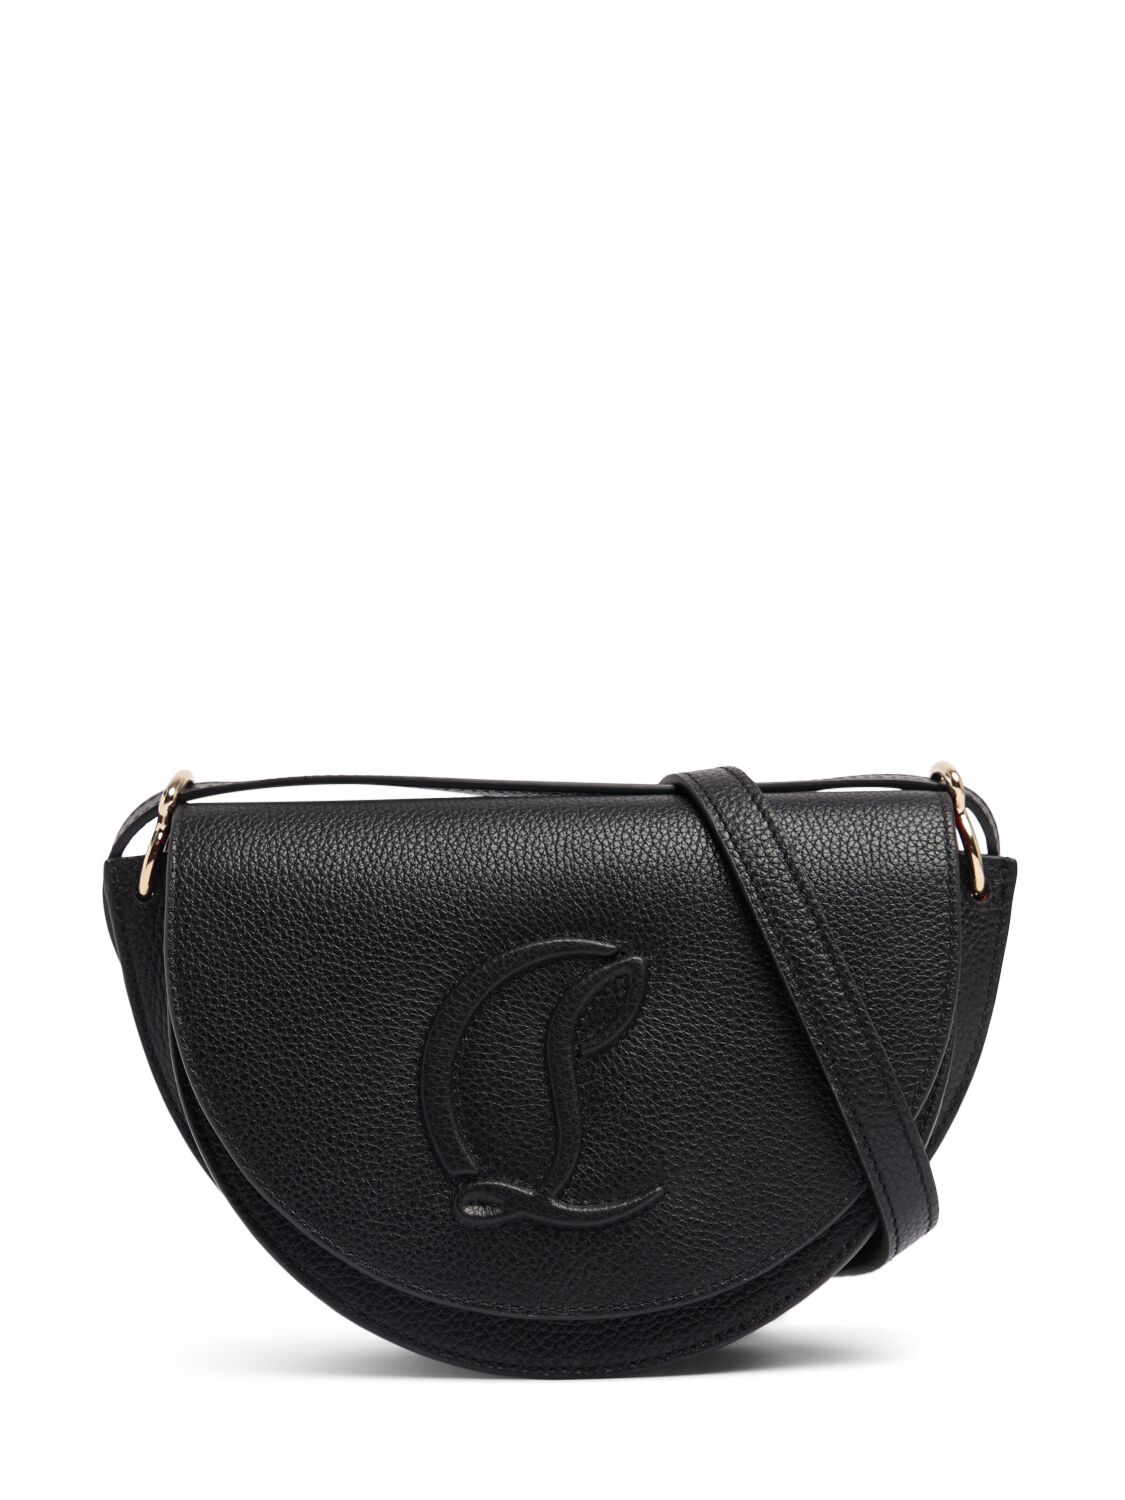 Christian Louboutin By My Side Leather Shoulder Bag In Black